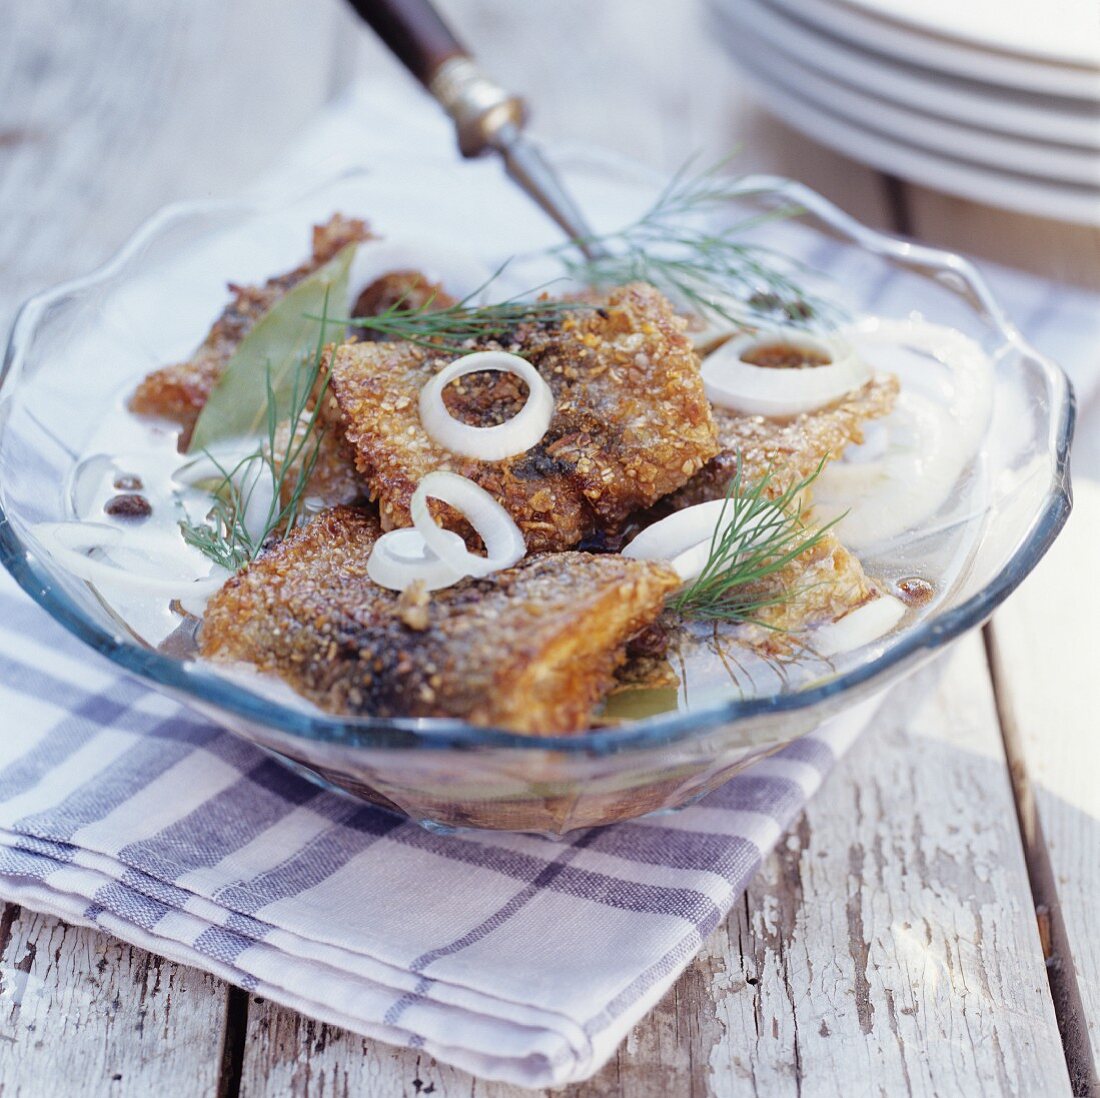 Fried herrings with onions, bay leaf and dill